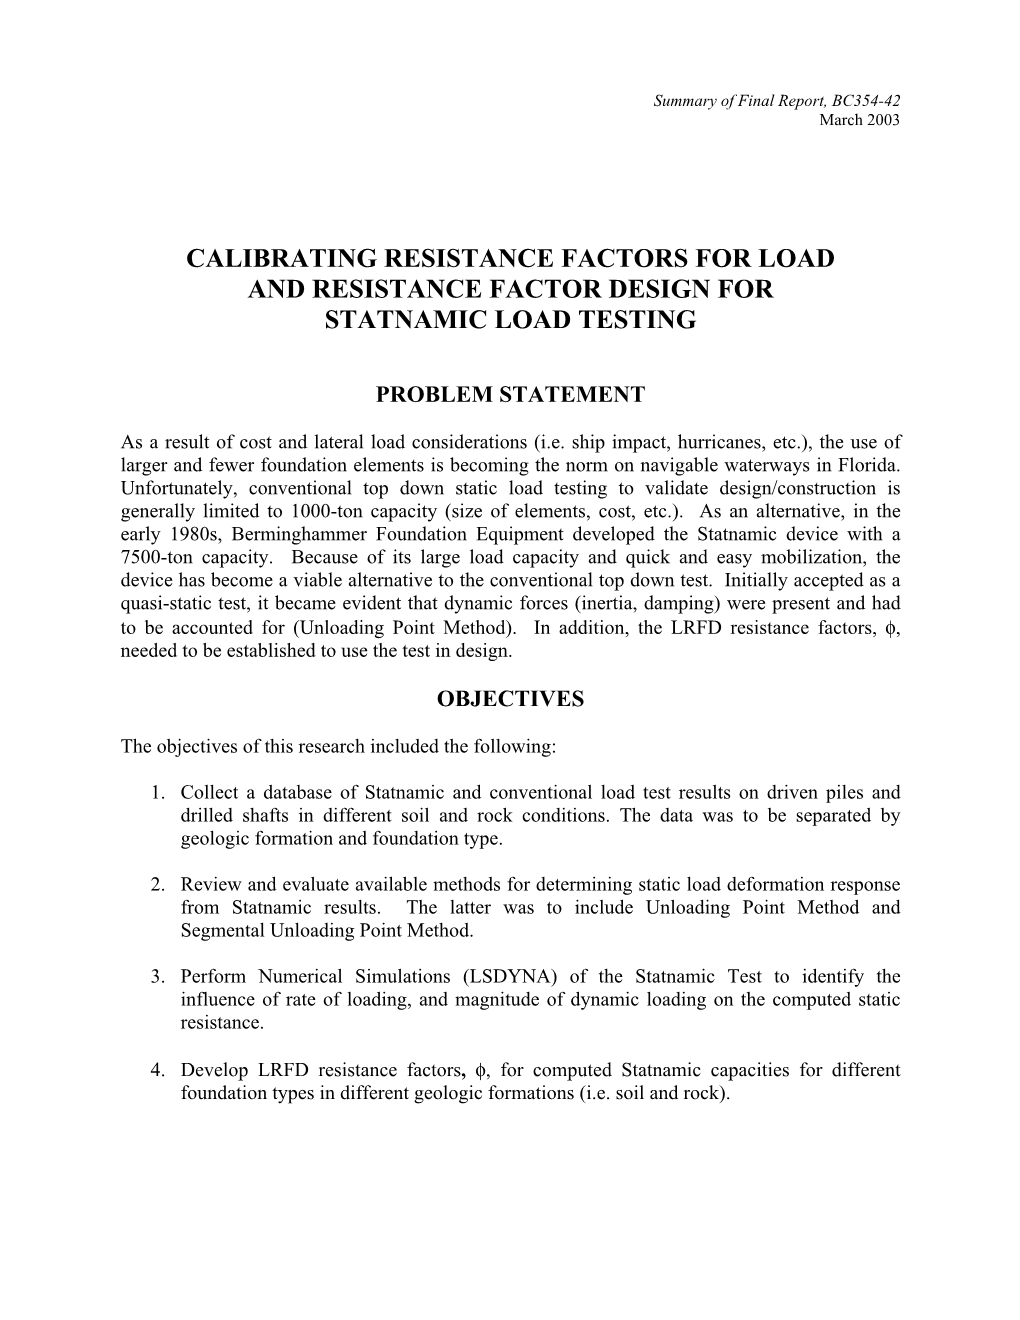 Calibrating Resistance Factors for Load and Resistance Factor Design for Statnamic Load Testing